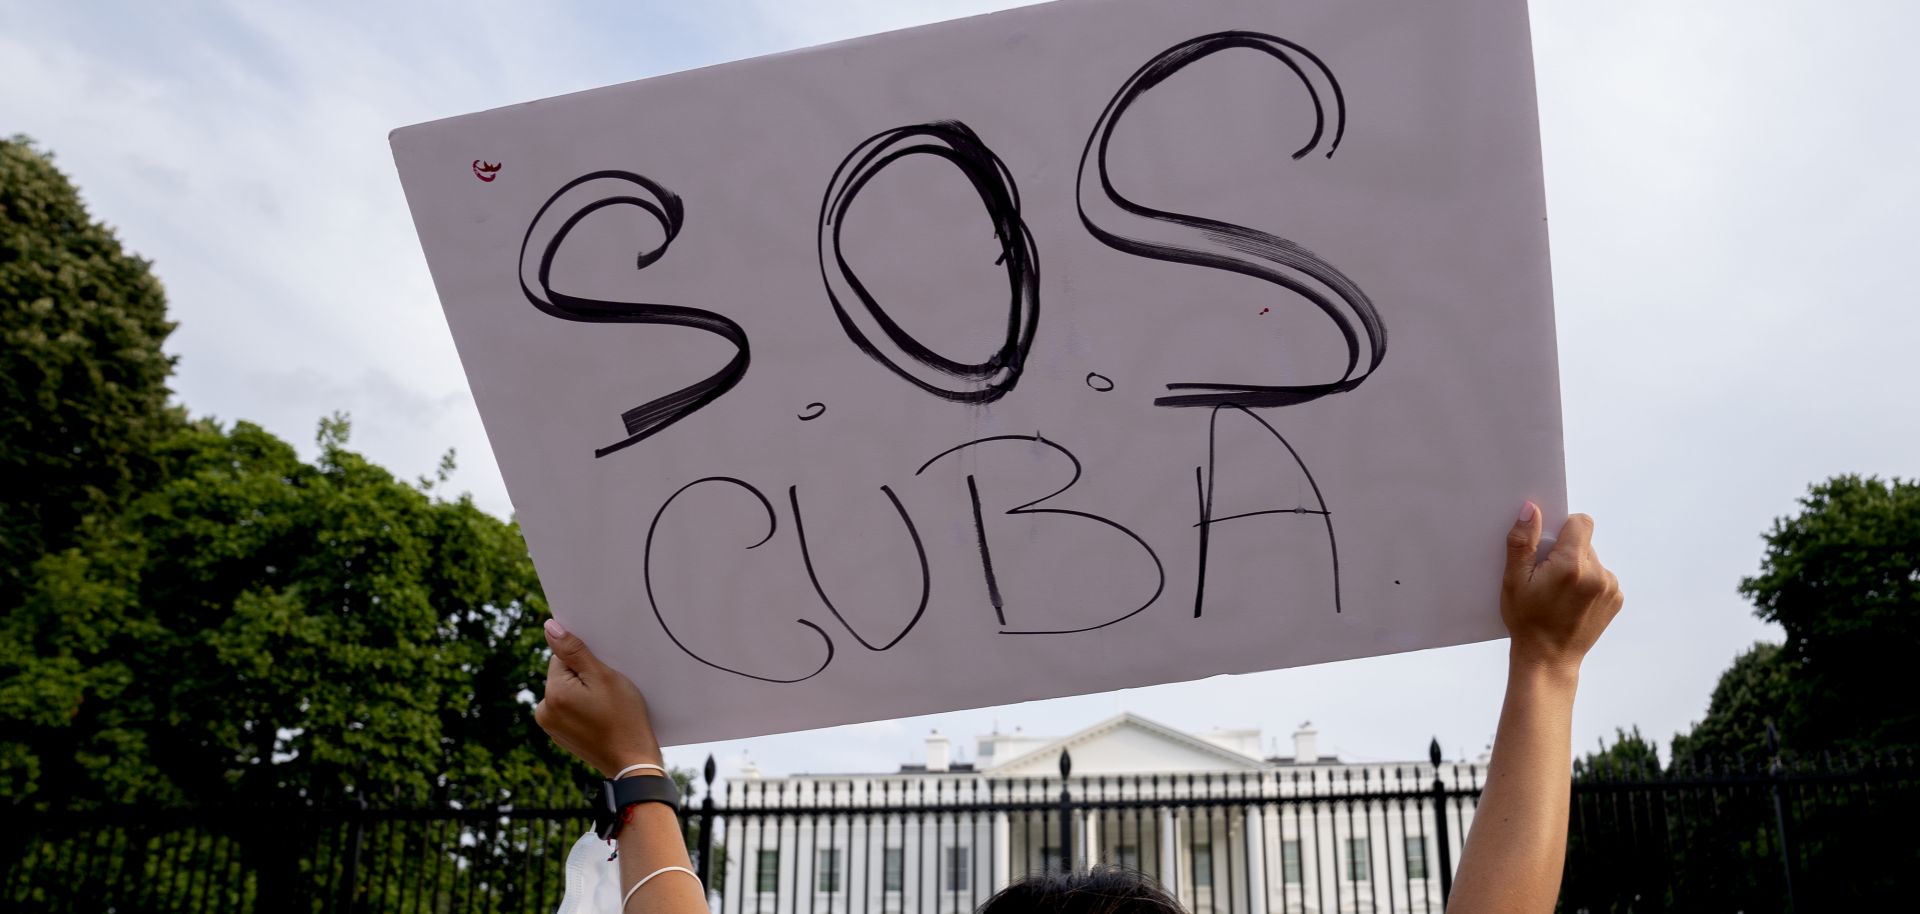 A demonstrator holds up a sign in solidarity with protesters in Cuba outside the White House on July 18, 2021. 